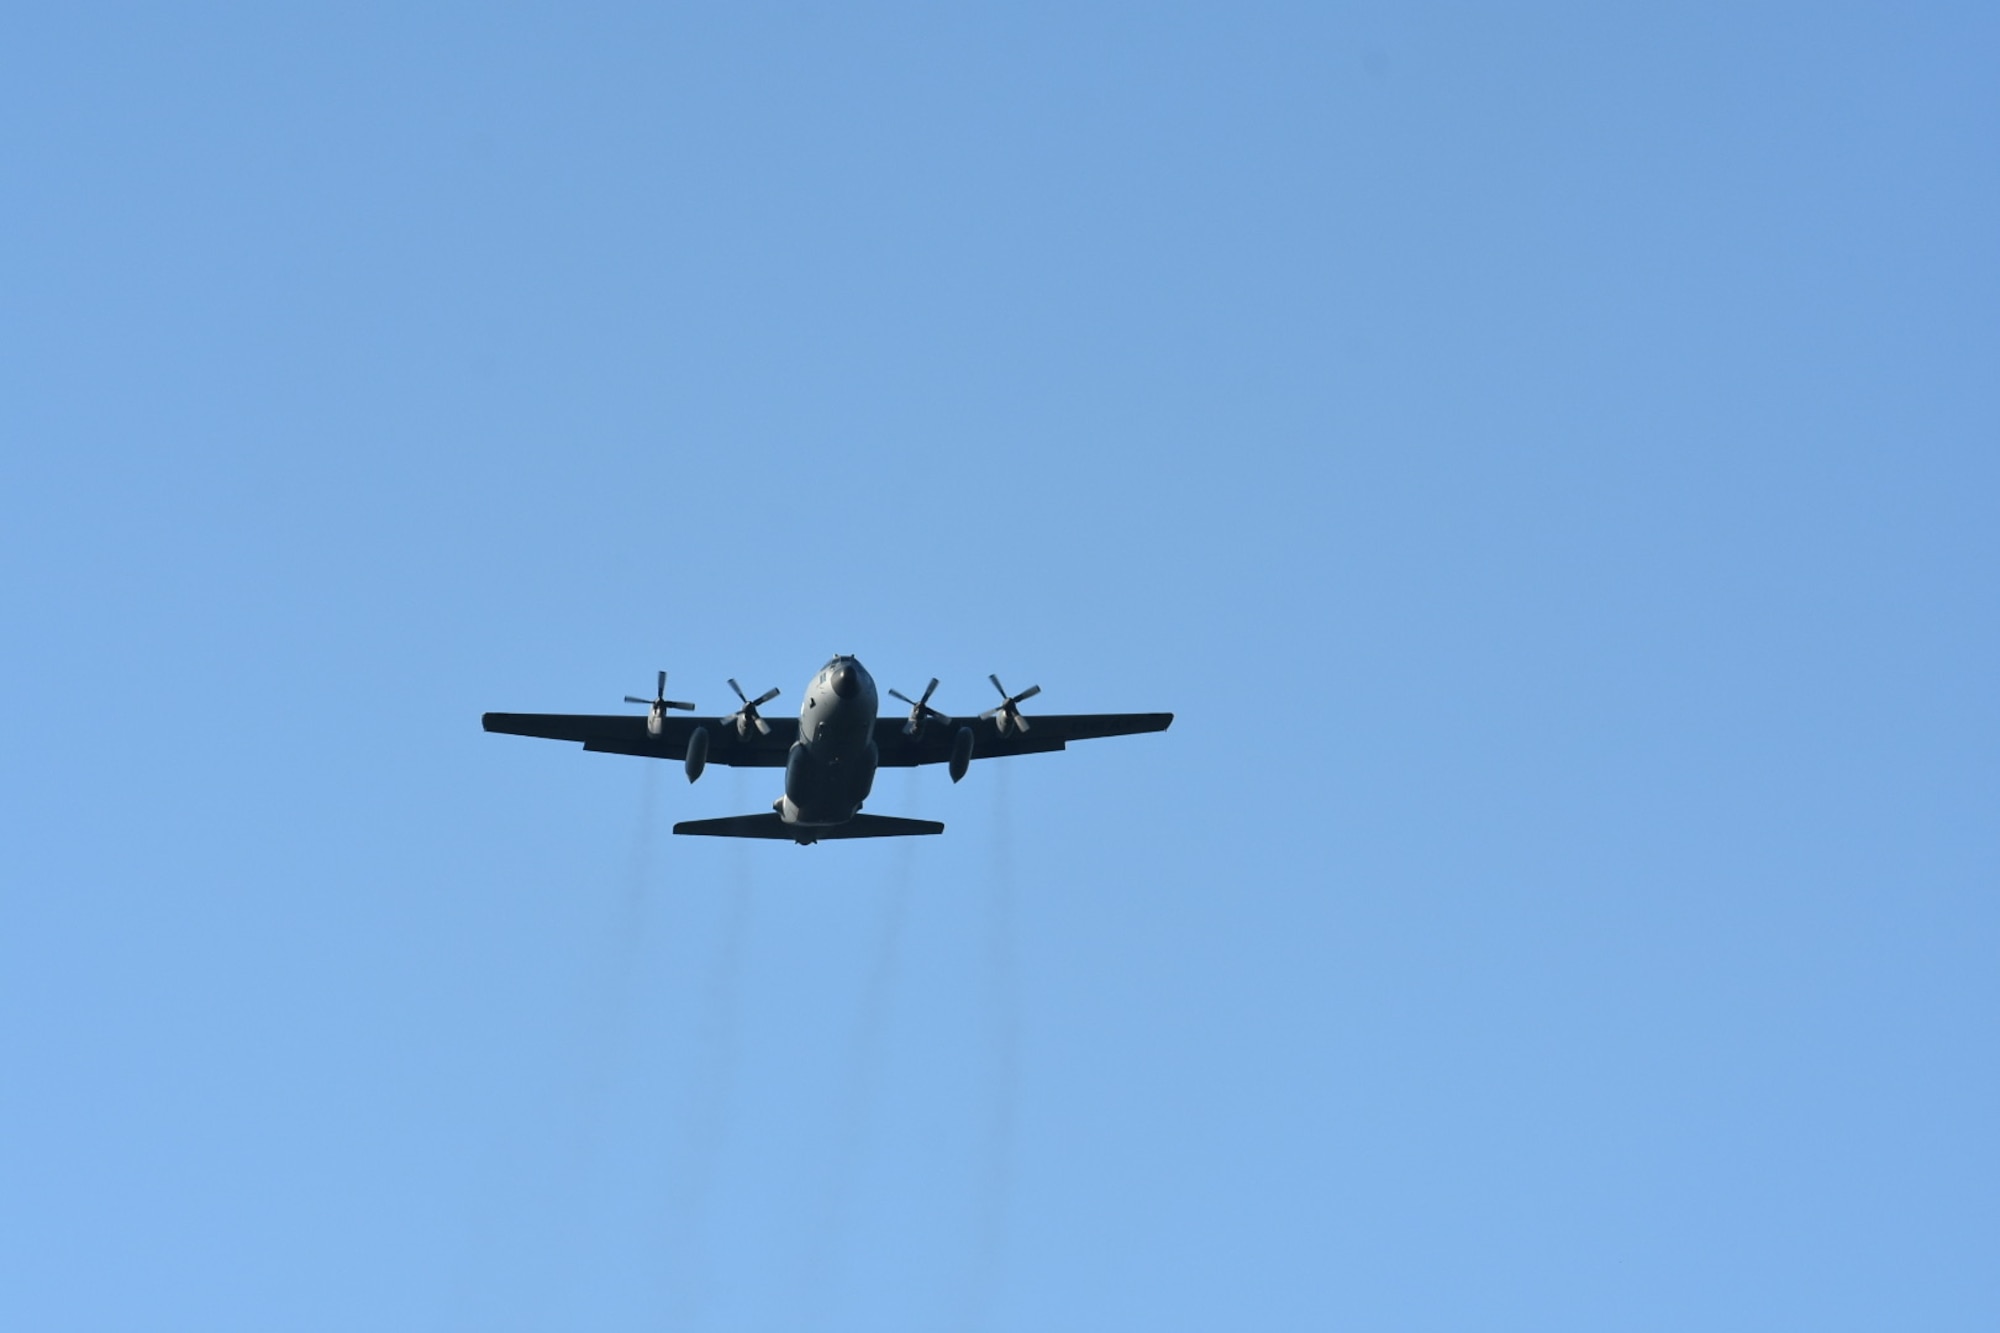 A C-130 assigned to the 133rd Airlift Wing, Minnesota Air National Guard approaches Fort McCoy’s Warrens and Badger Drop Zones during a joint Close Air Support training mission on June 23, 2021.